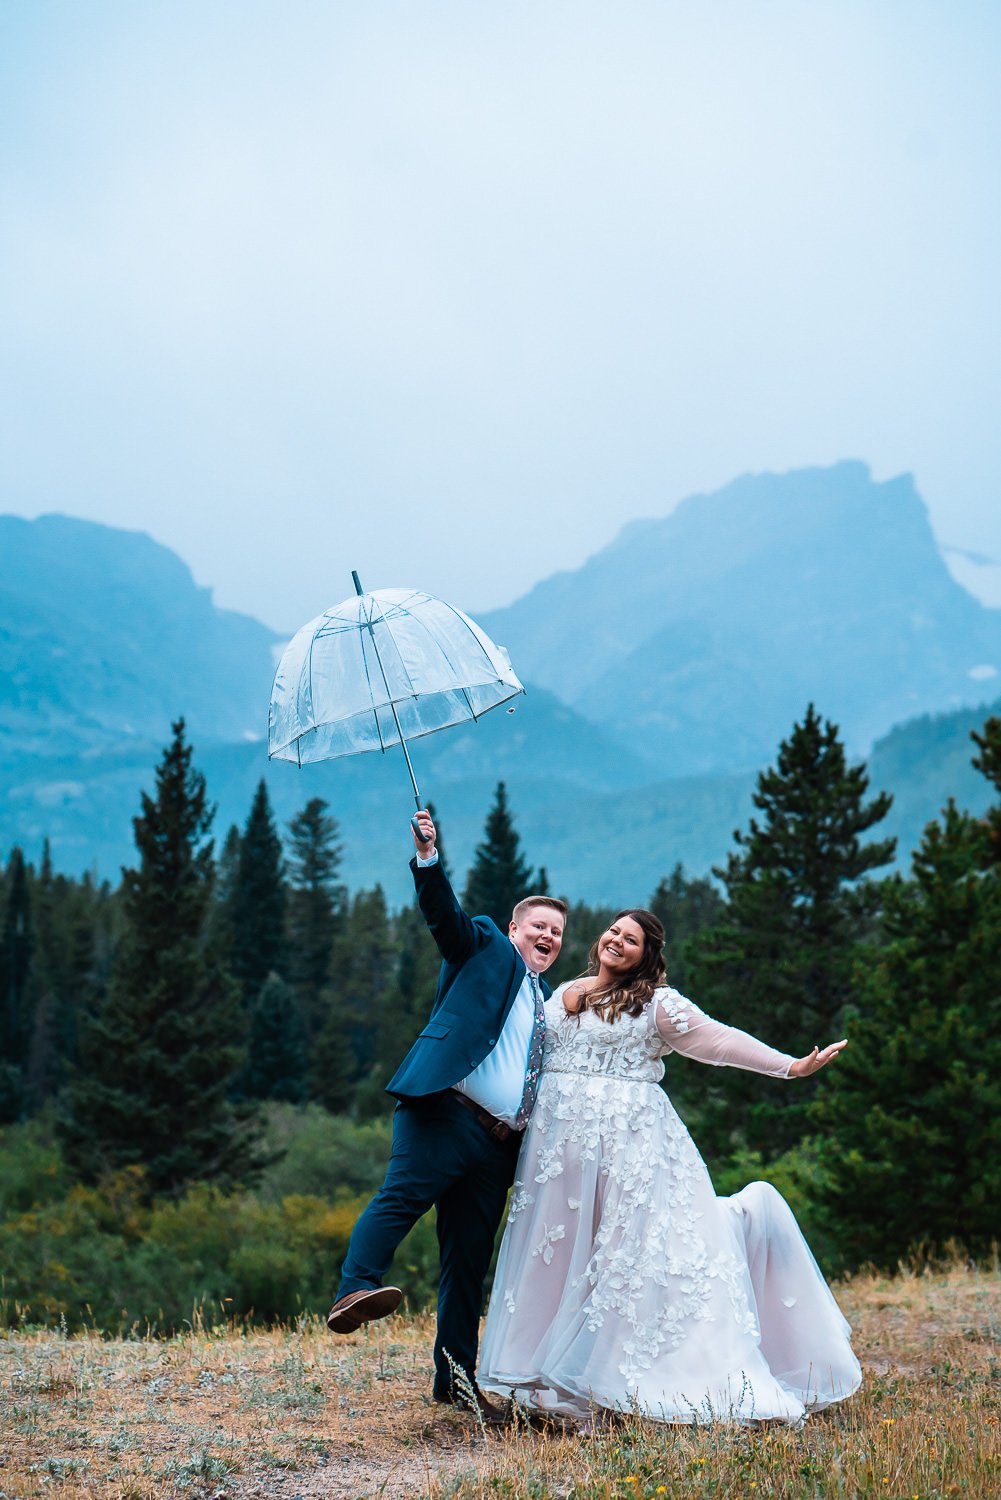 An enchanting elopement photoshoot of a bride and groom holding an umbrella in a beautiful field.